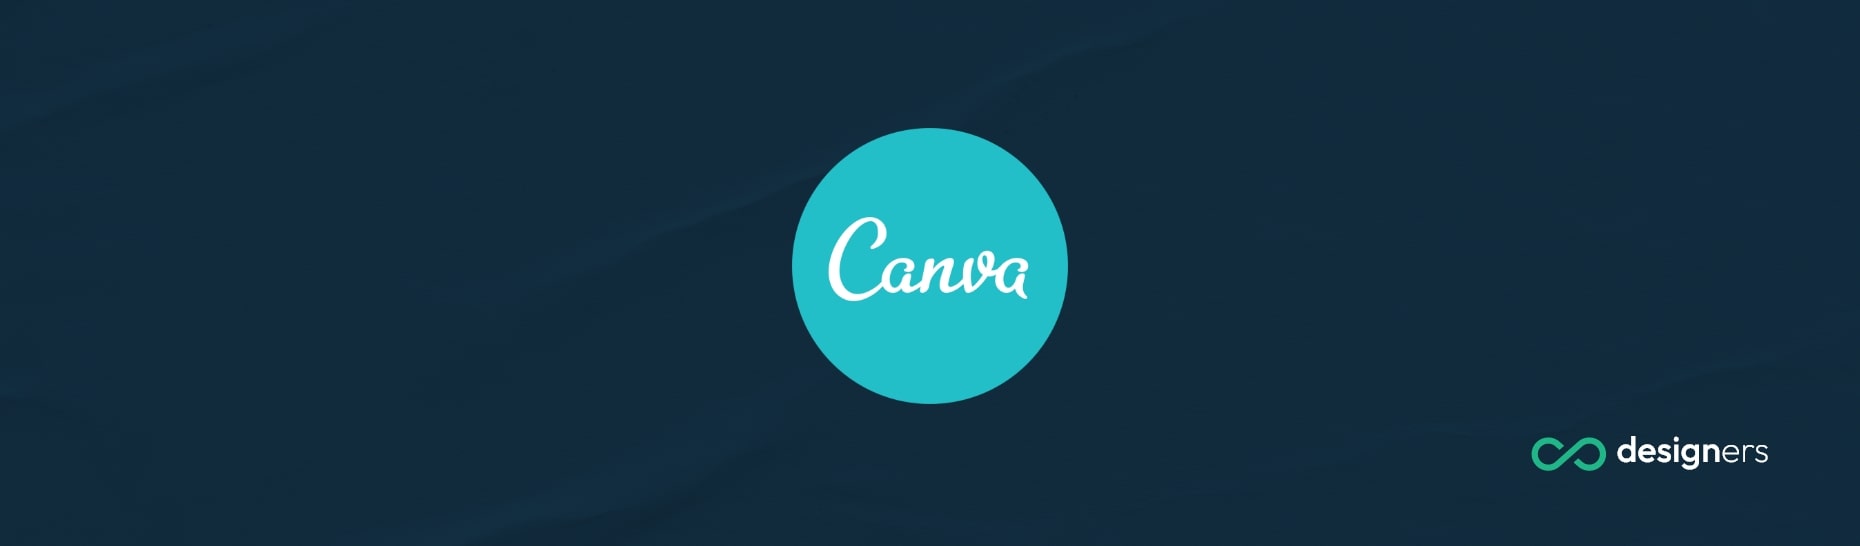 How Do I Show Gridlines in Canva? 